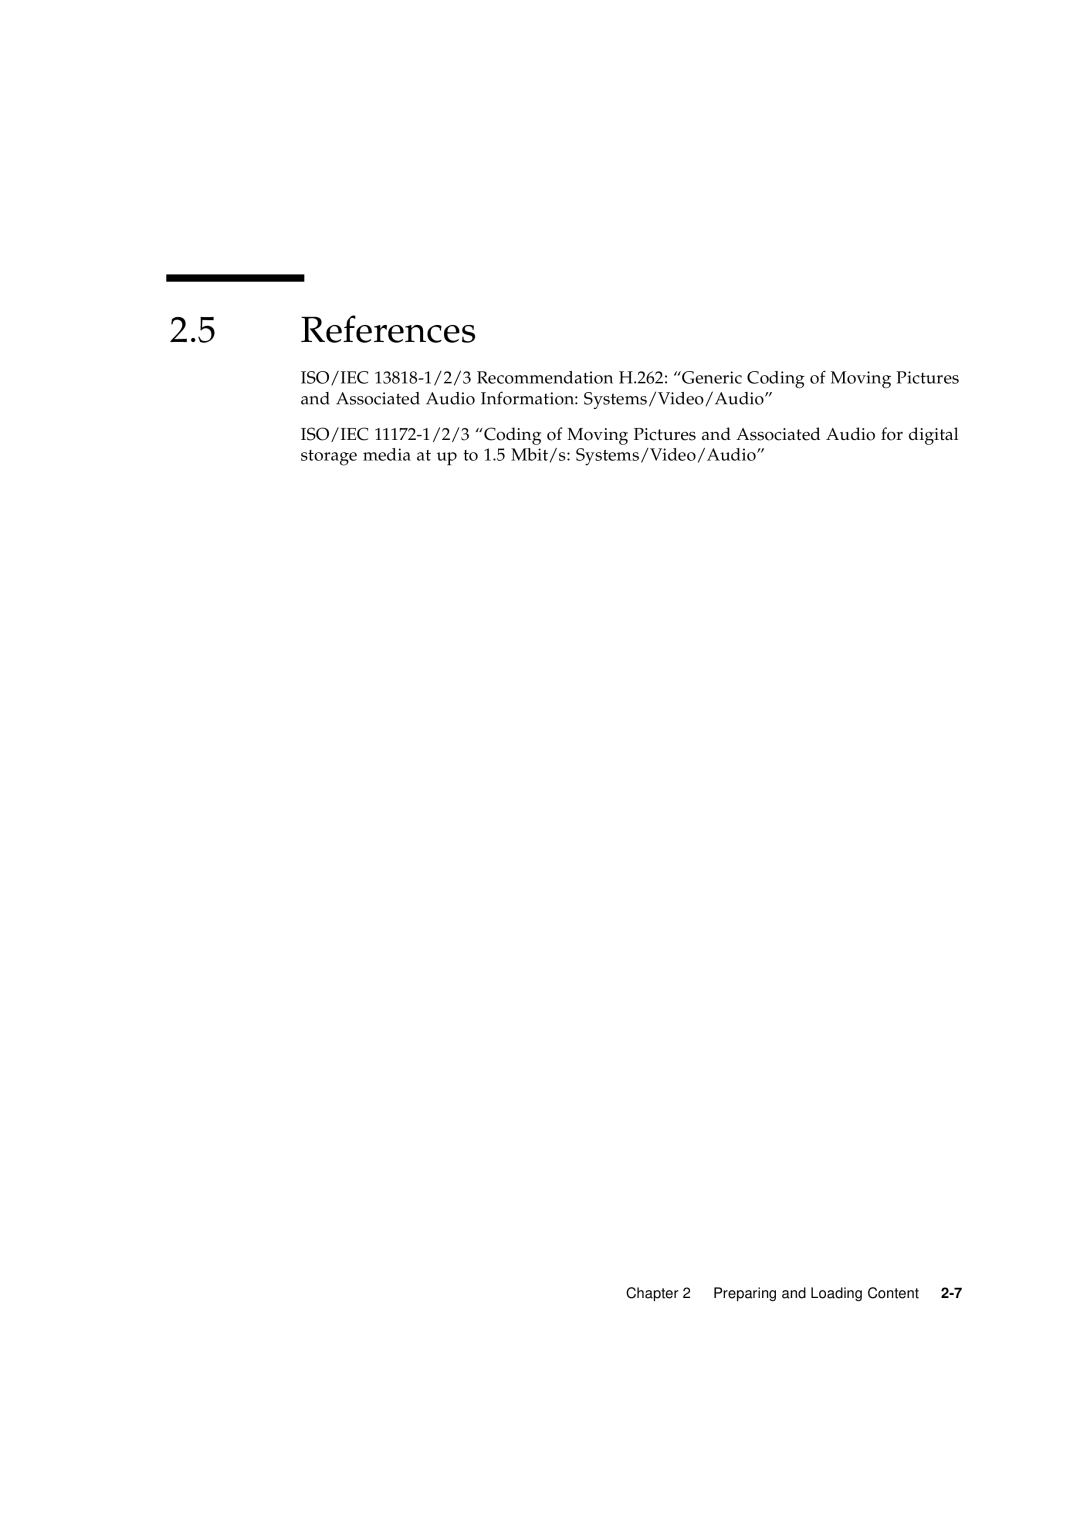 Sun Microsystems 2.1 manual References 